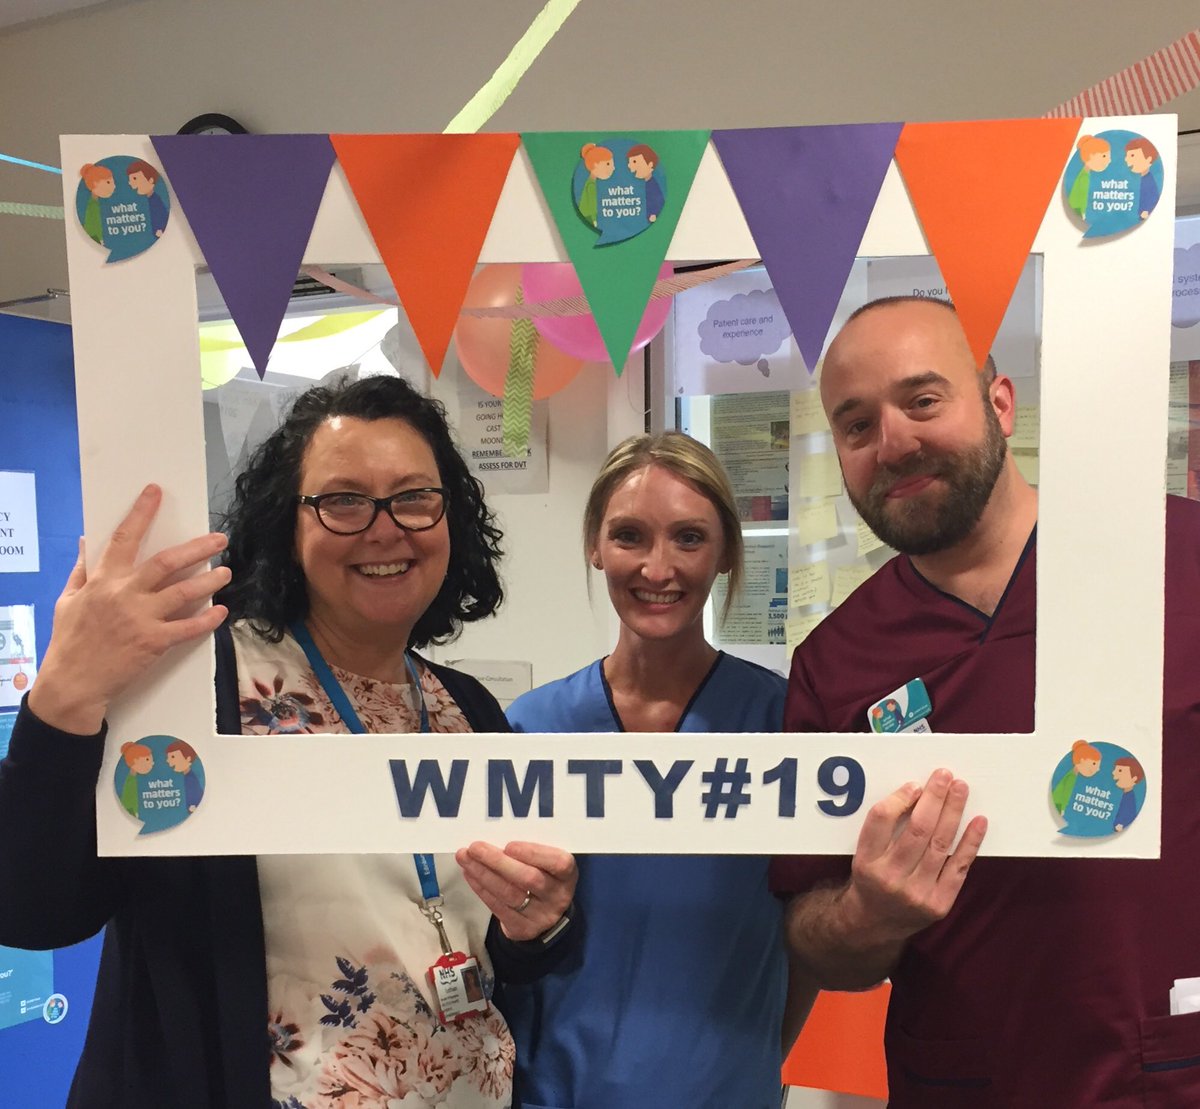 Still time to join us....
The feedback sheets will be up all weekend.

#WMTY19